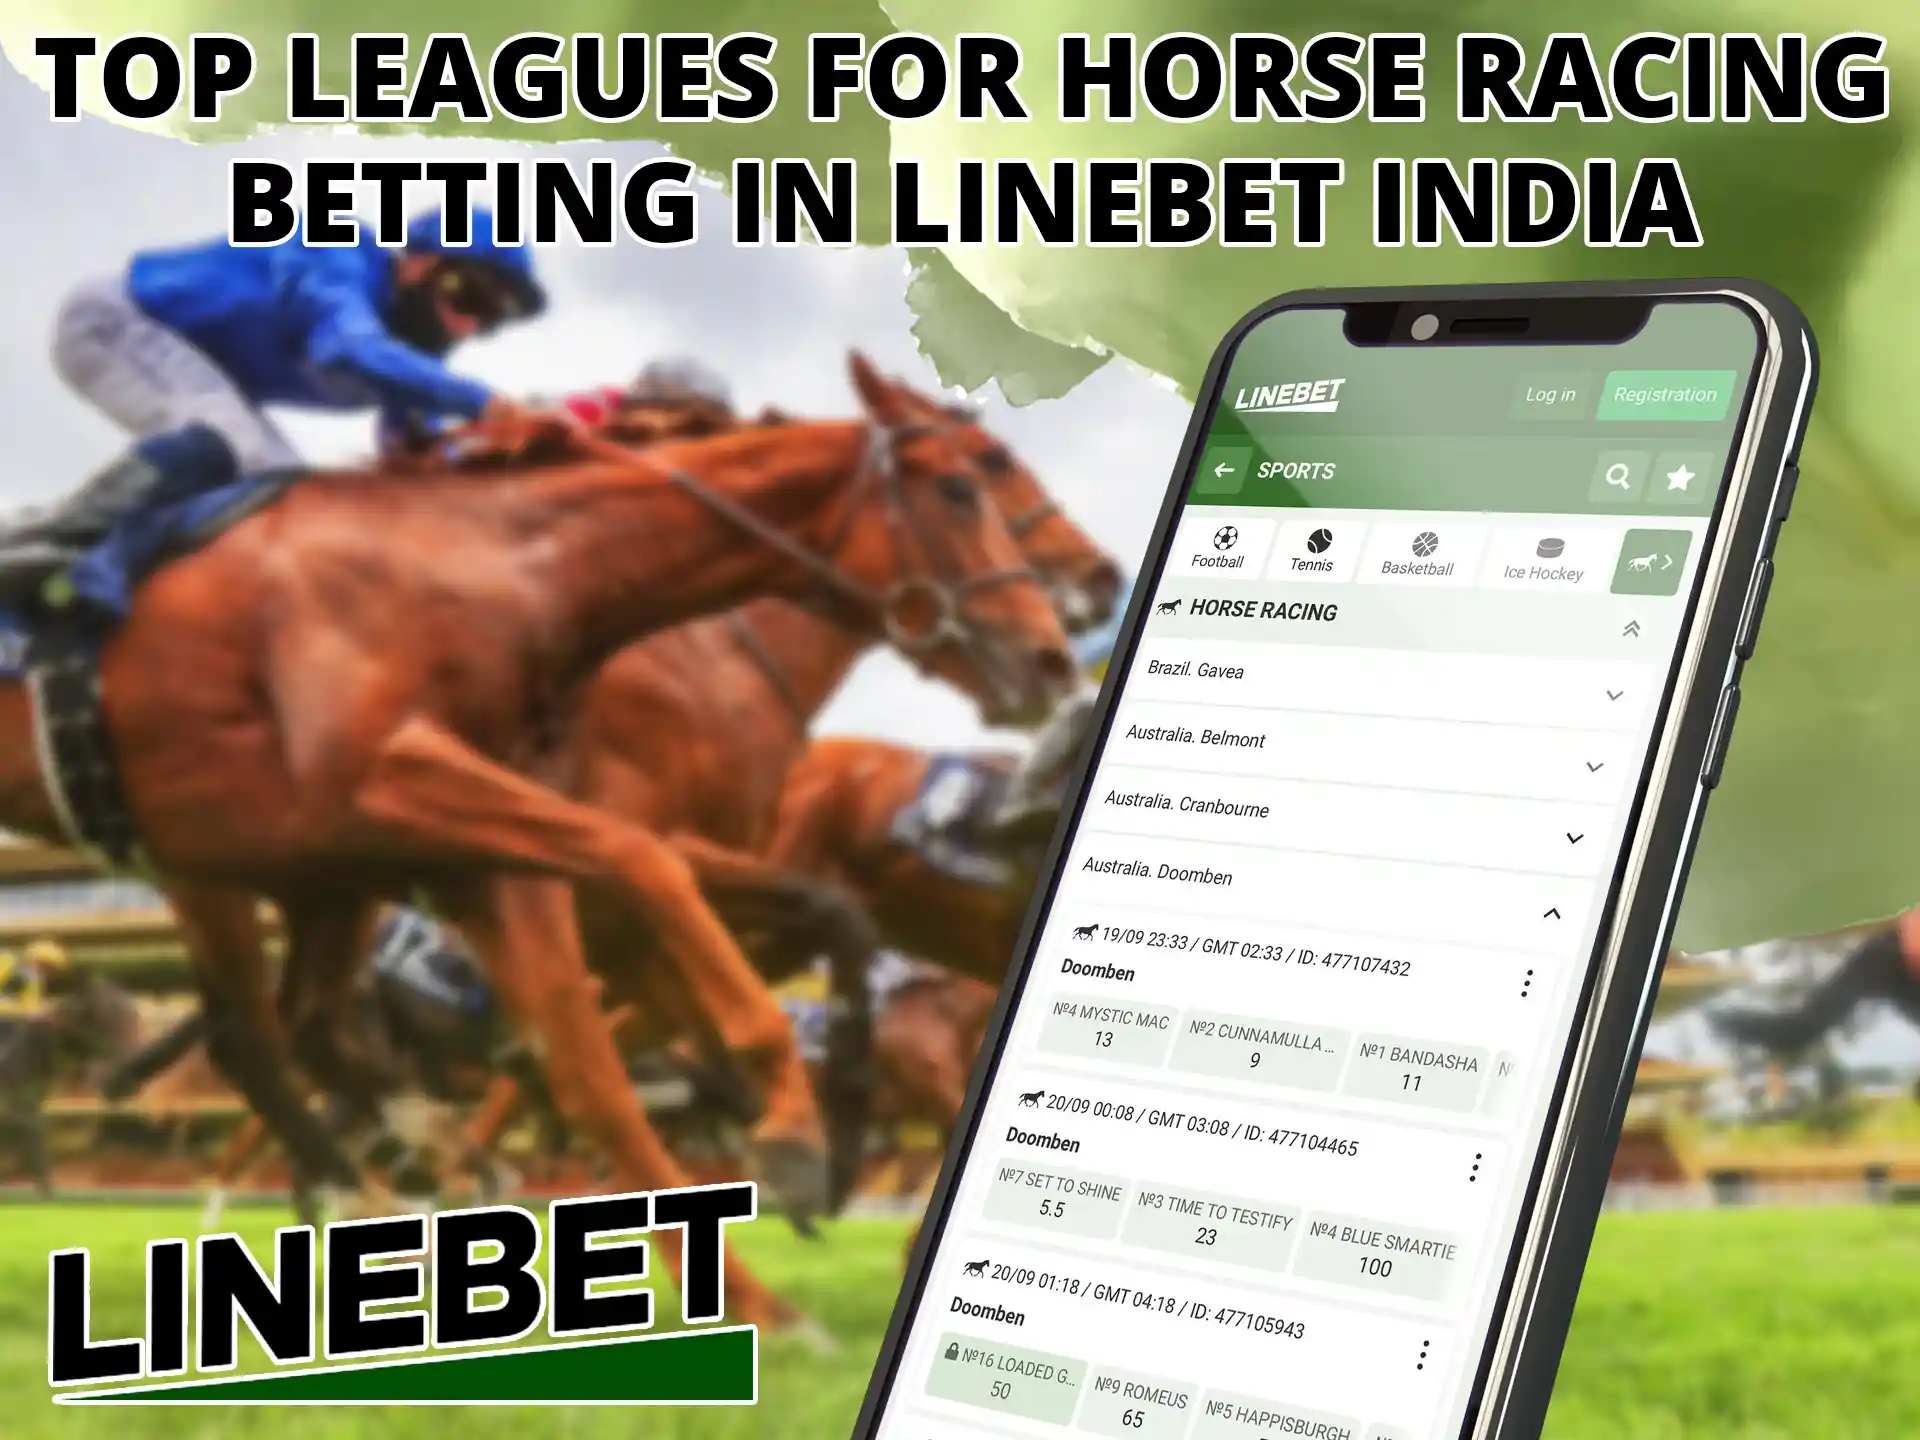 Linebet regularly updates horse racing events and offers a large selection of betting markets.